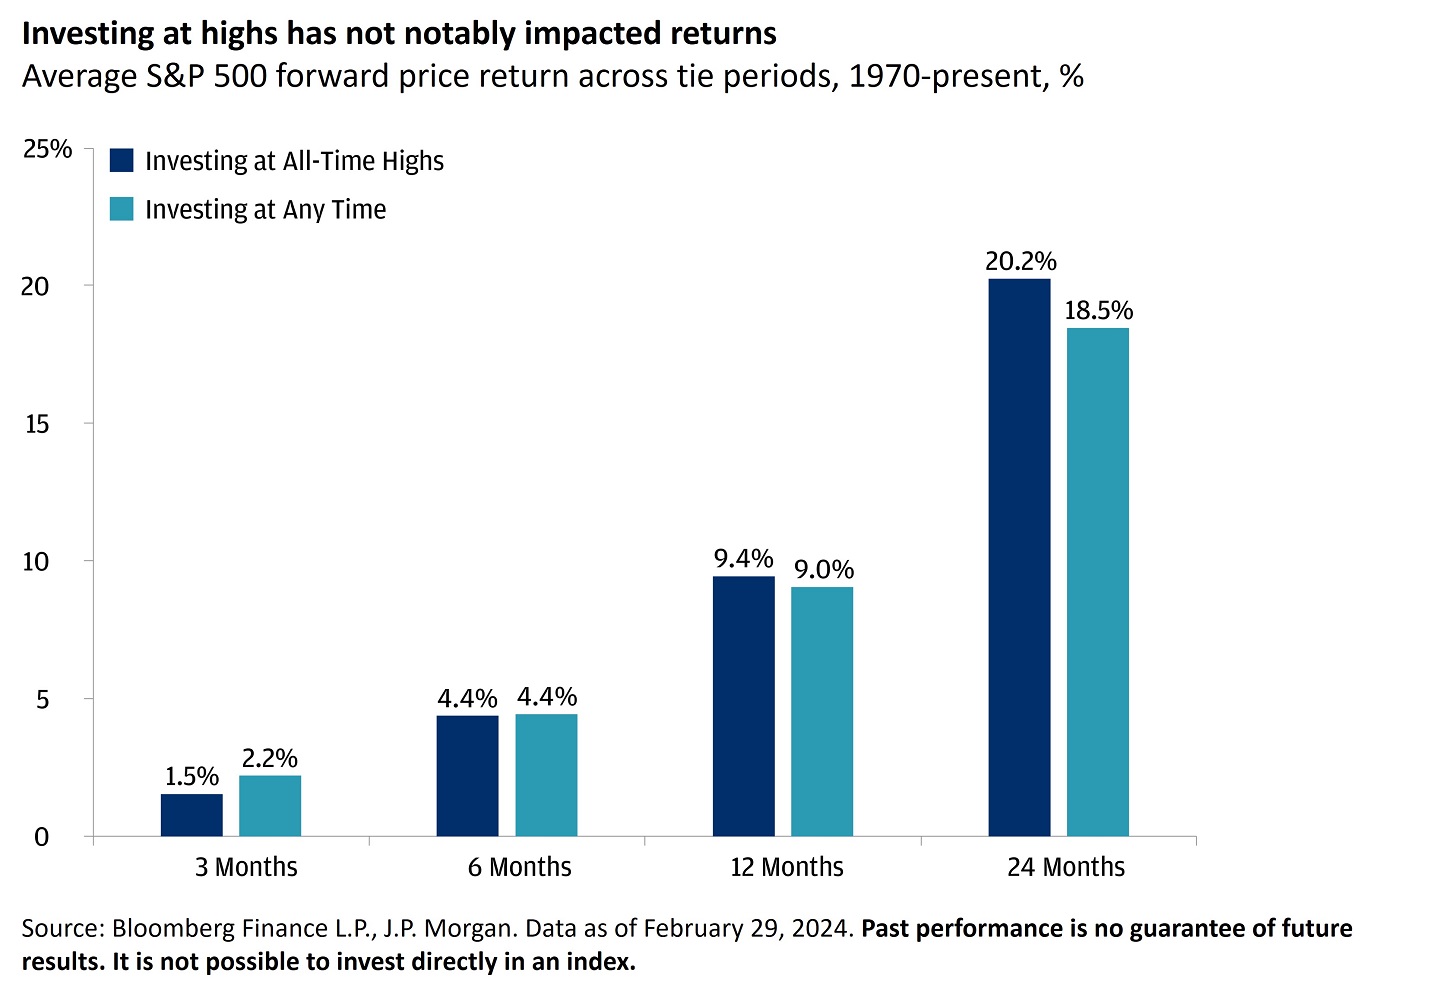 This chart shows average S&P 500 forward price return across time periods, from 1970-present.